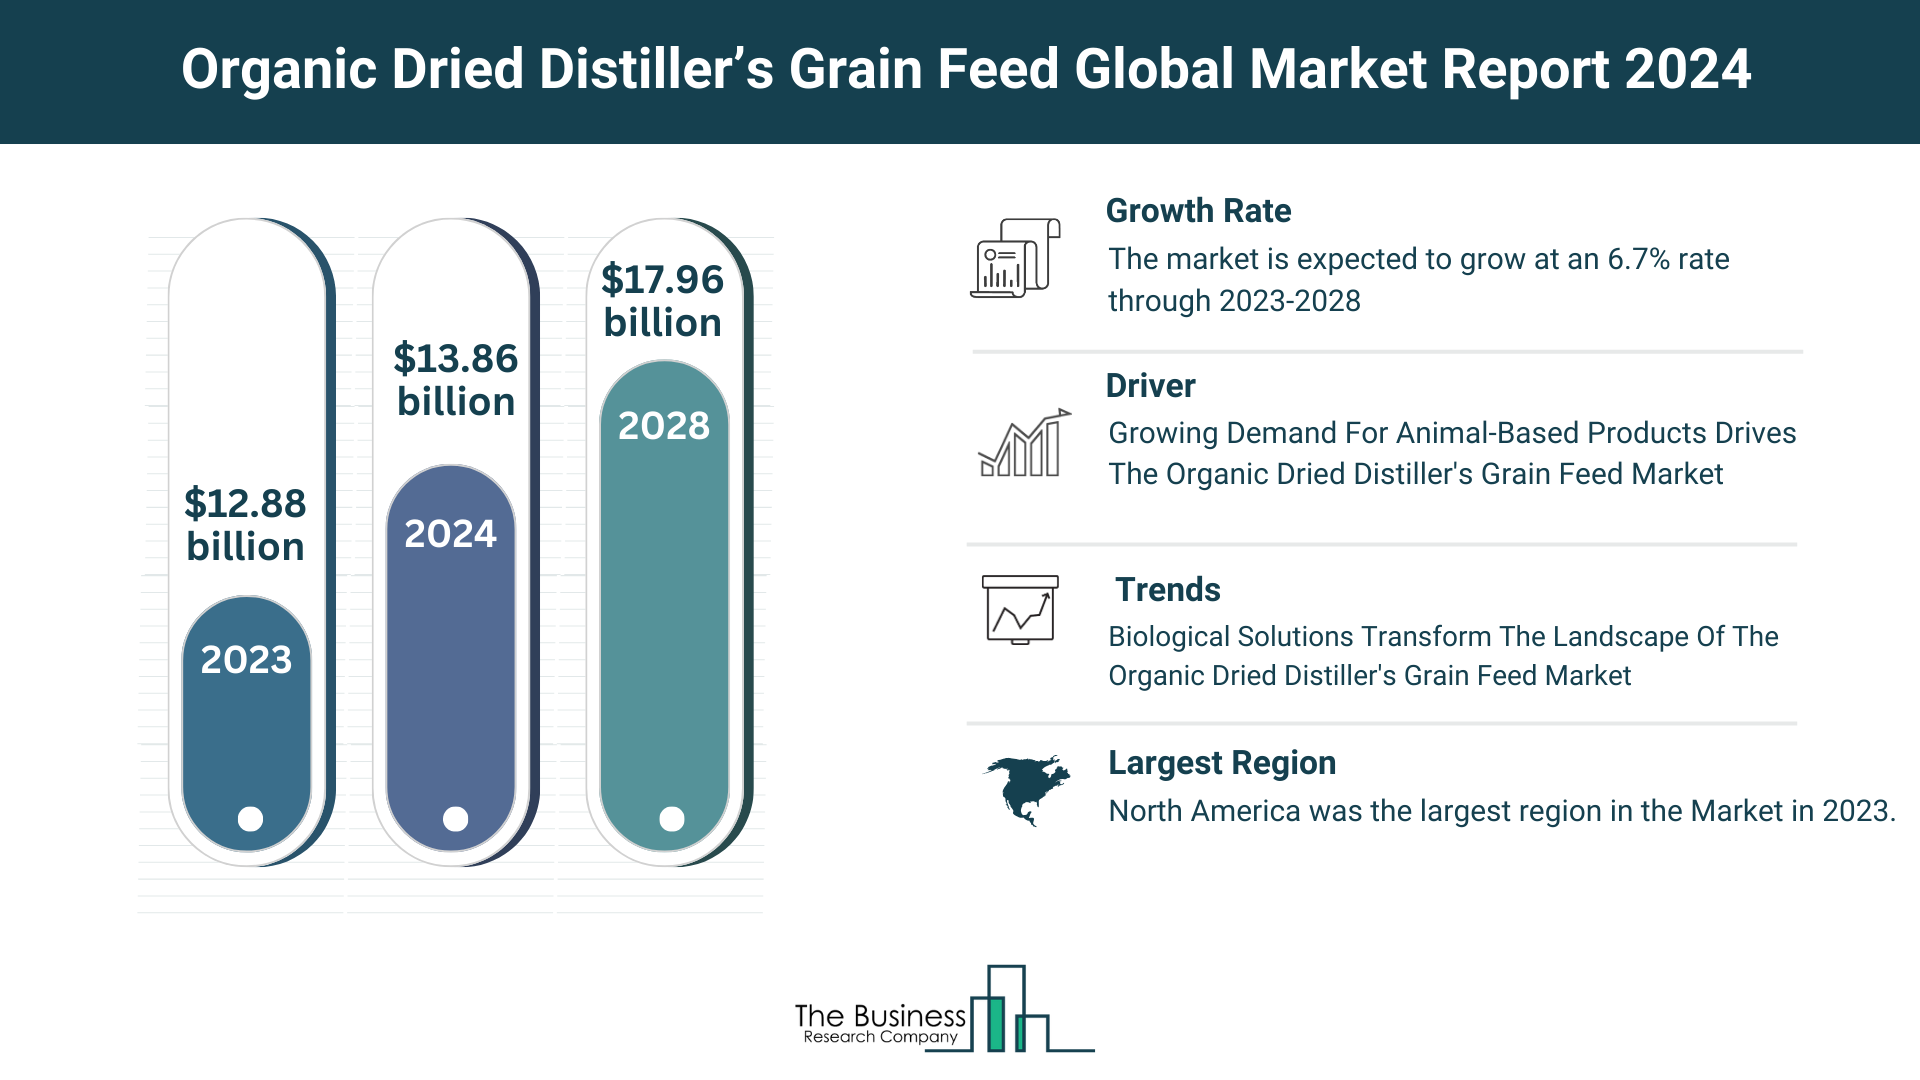 What Are The 5 Takeaways From The Organic Dried Distiller’s Grain Feed Market Overview 2024